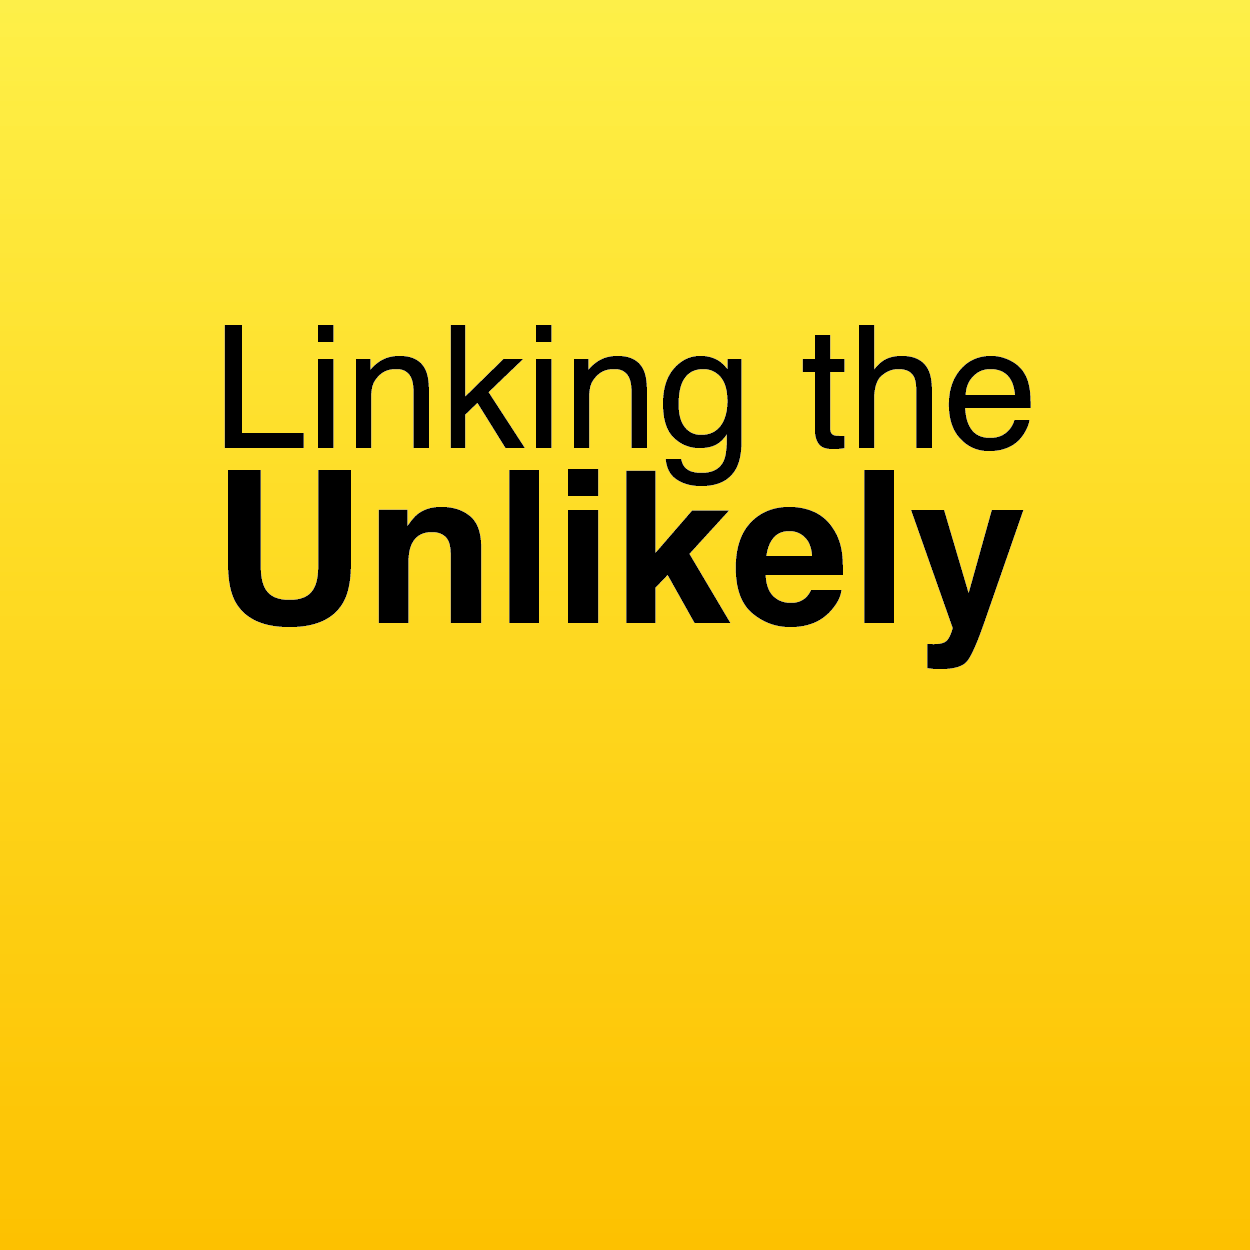 Linking the Unlikely